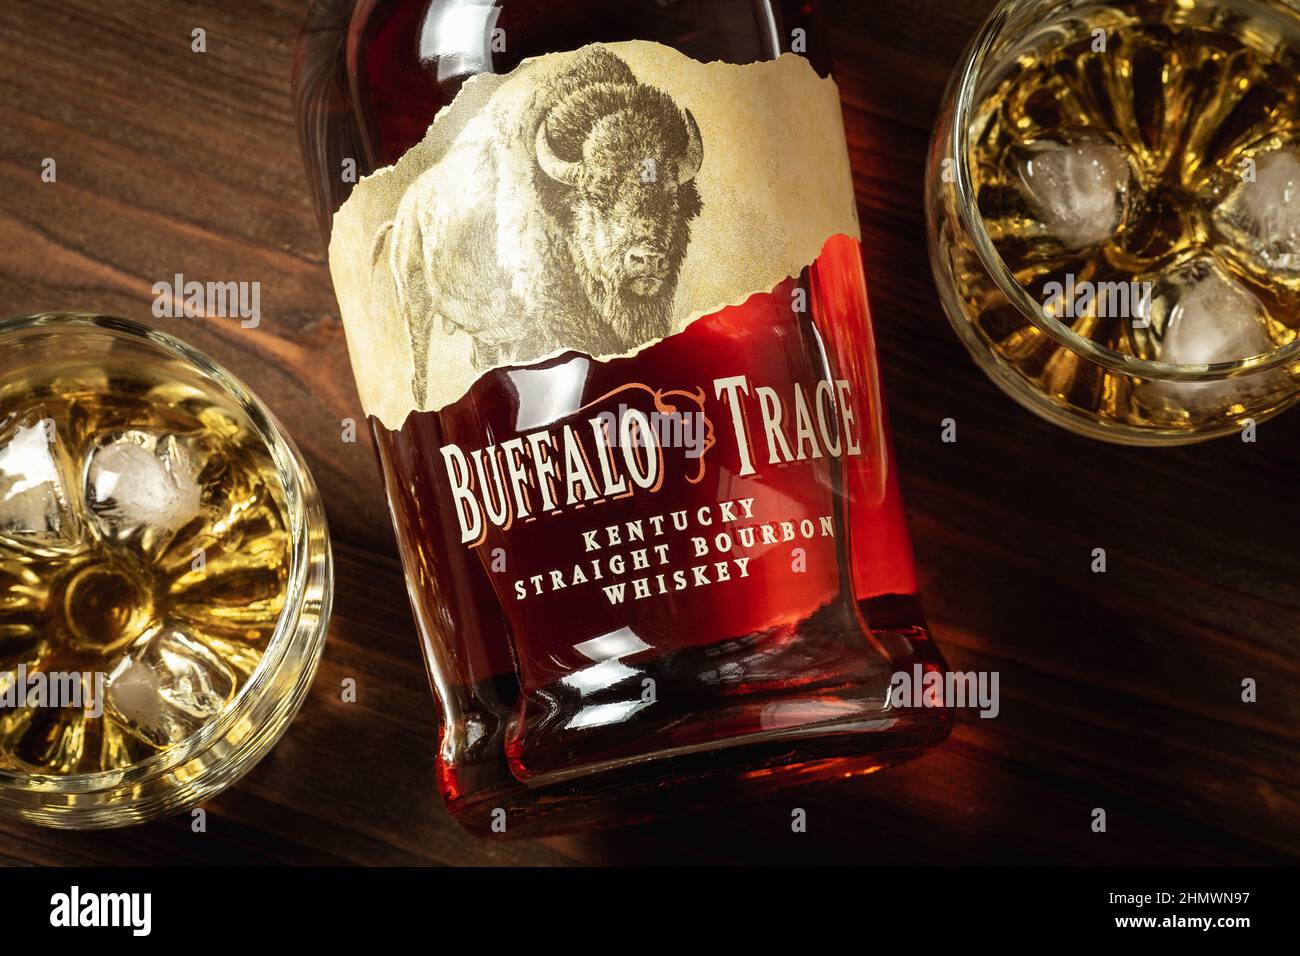 Ternopil, Ukraine - April 29, 2021: A bottle of Buffalo Trace Kentucky Straight Bourbon whiskey and two glasses with ice and bourbon on a wooden table Stock Photo